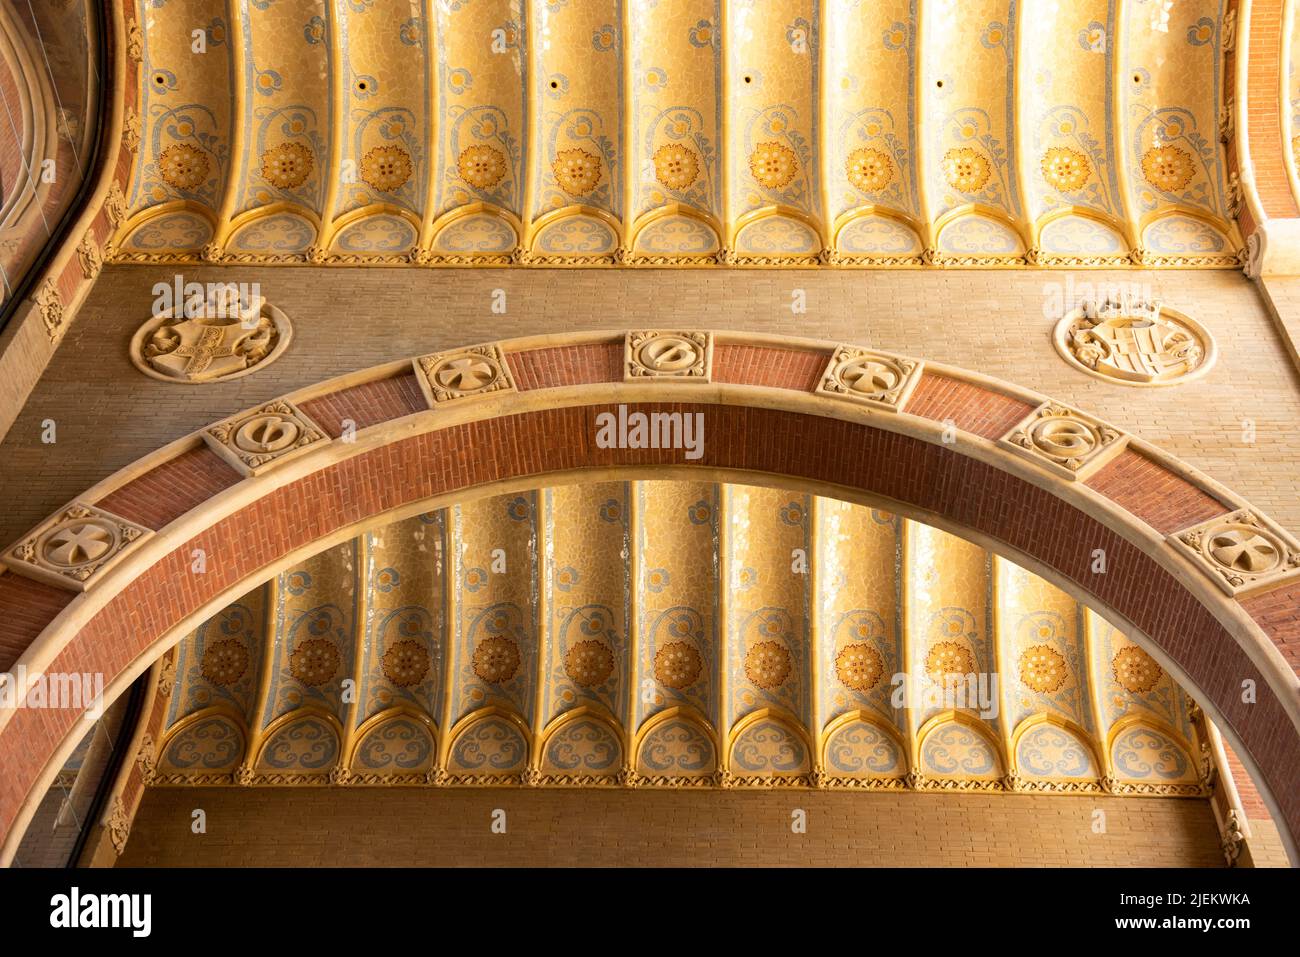 Ornate ribbed ceiling Stock Photo